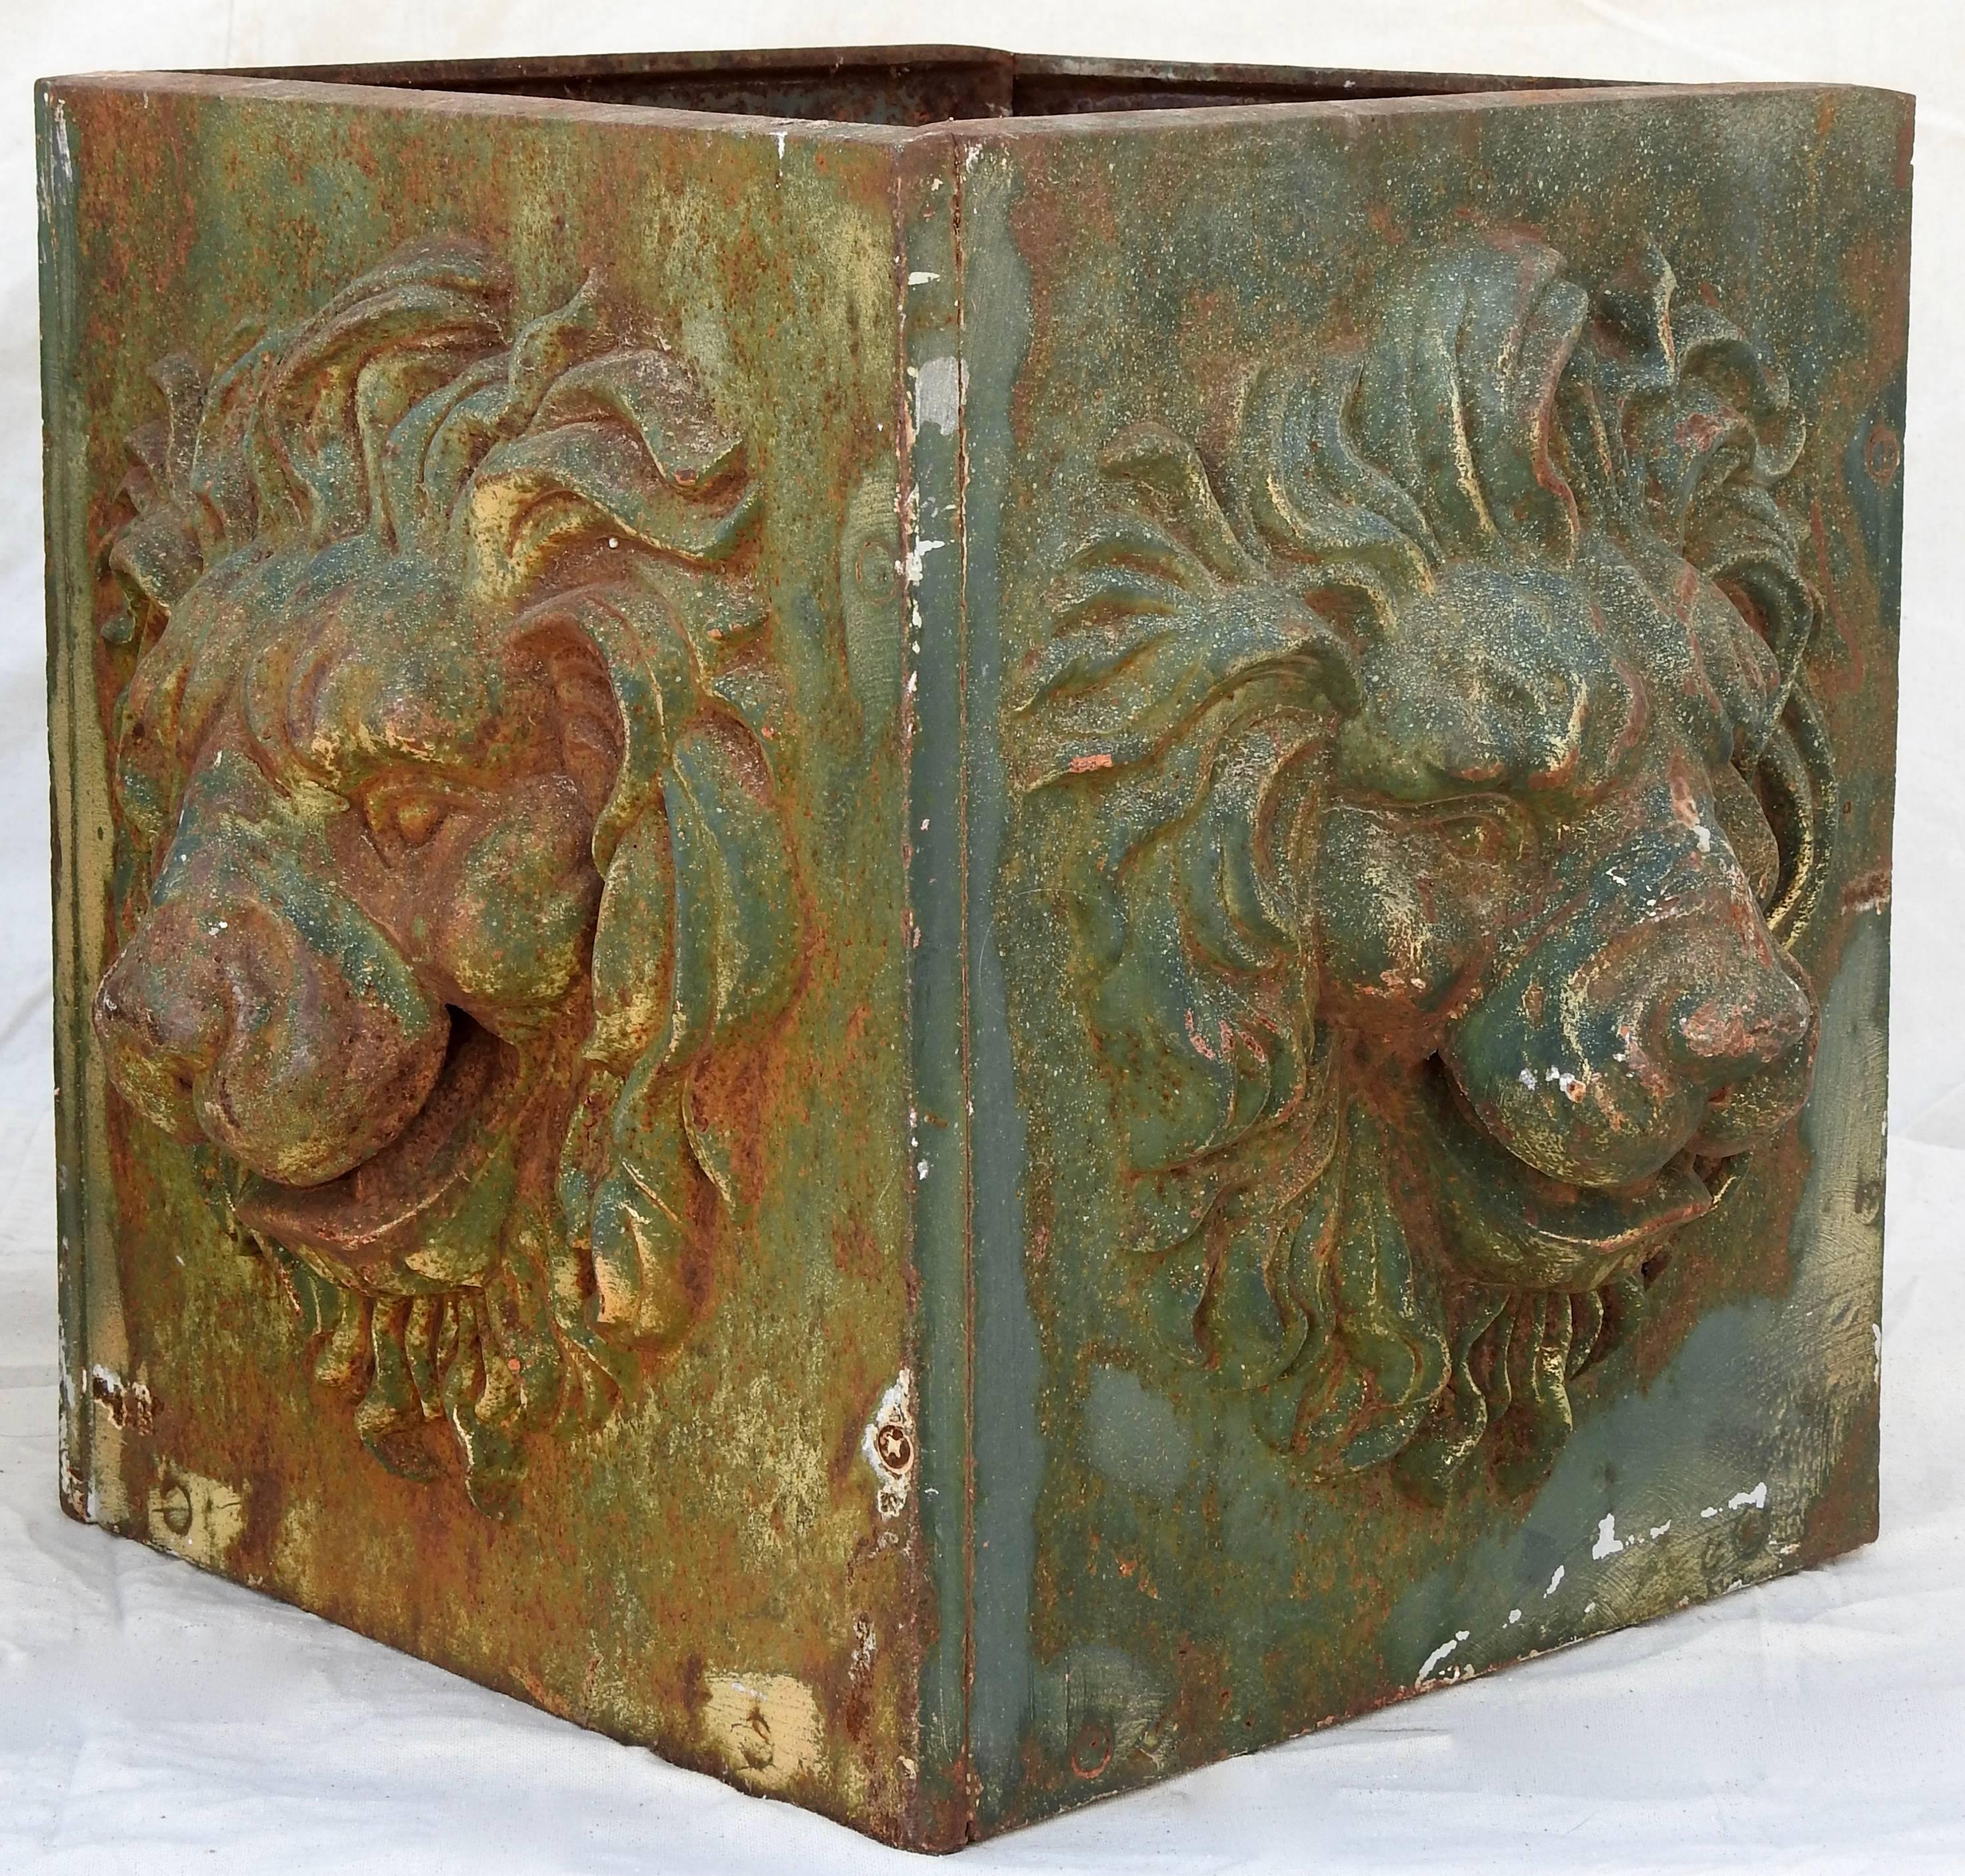 Featured is an exceptional pair of cast iron planter boxes. This pair of boxes have a dimensional lions face on each side. They are in the shape of a square box and have a greenish color with a rusty patina.